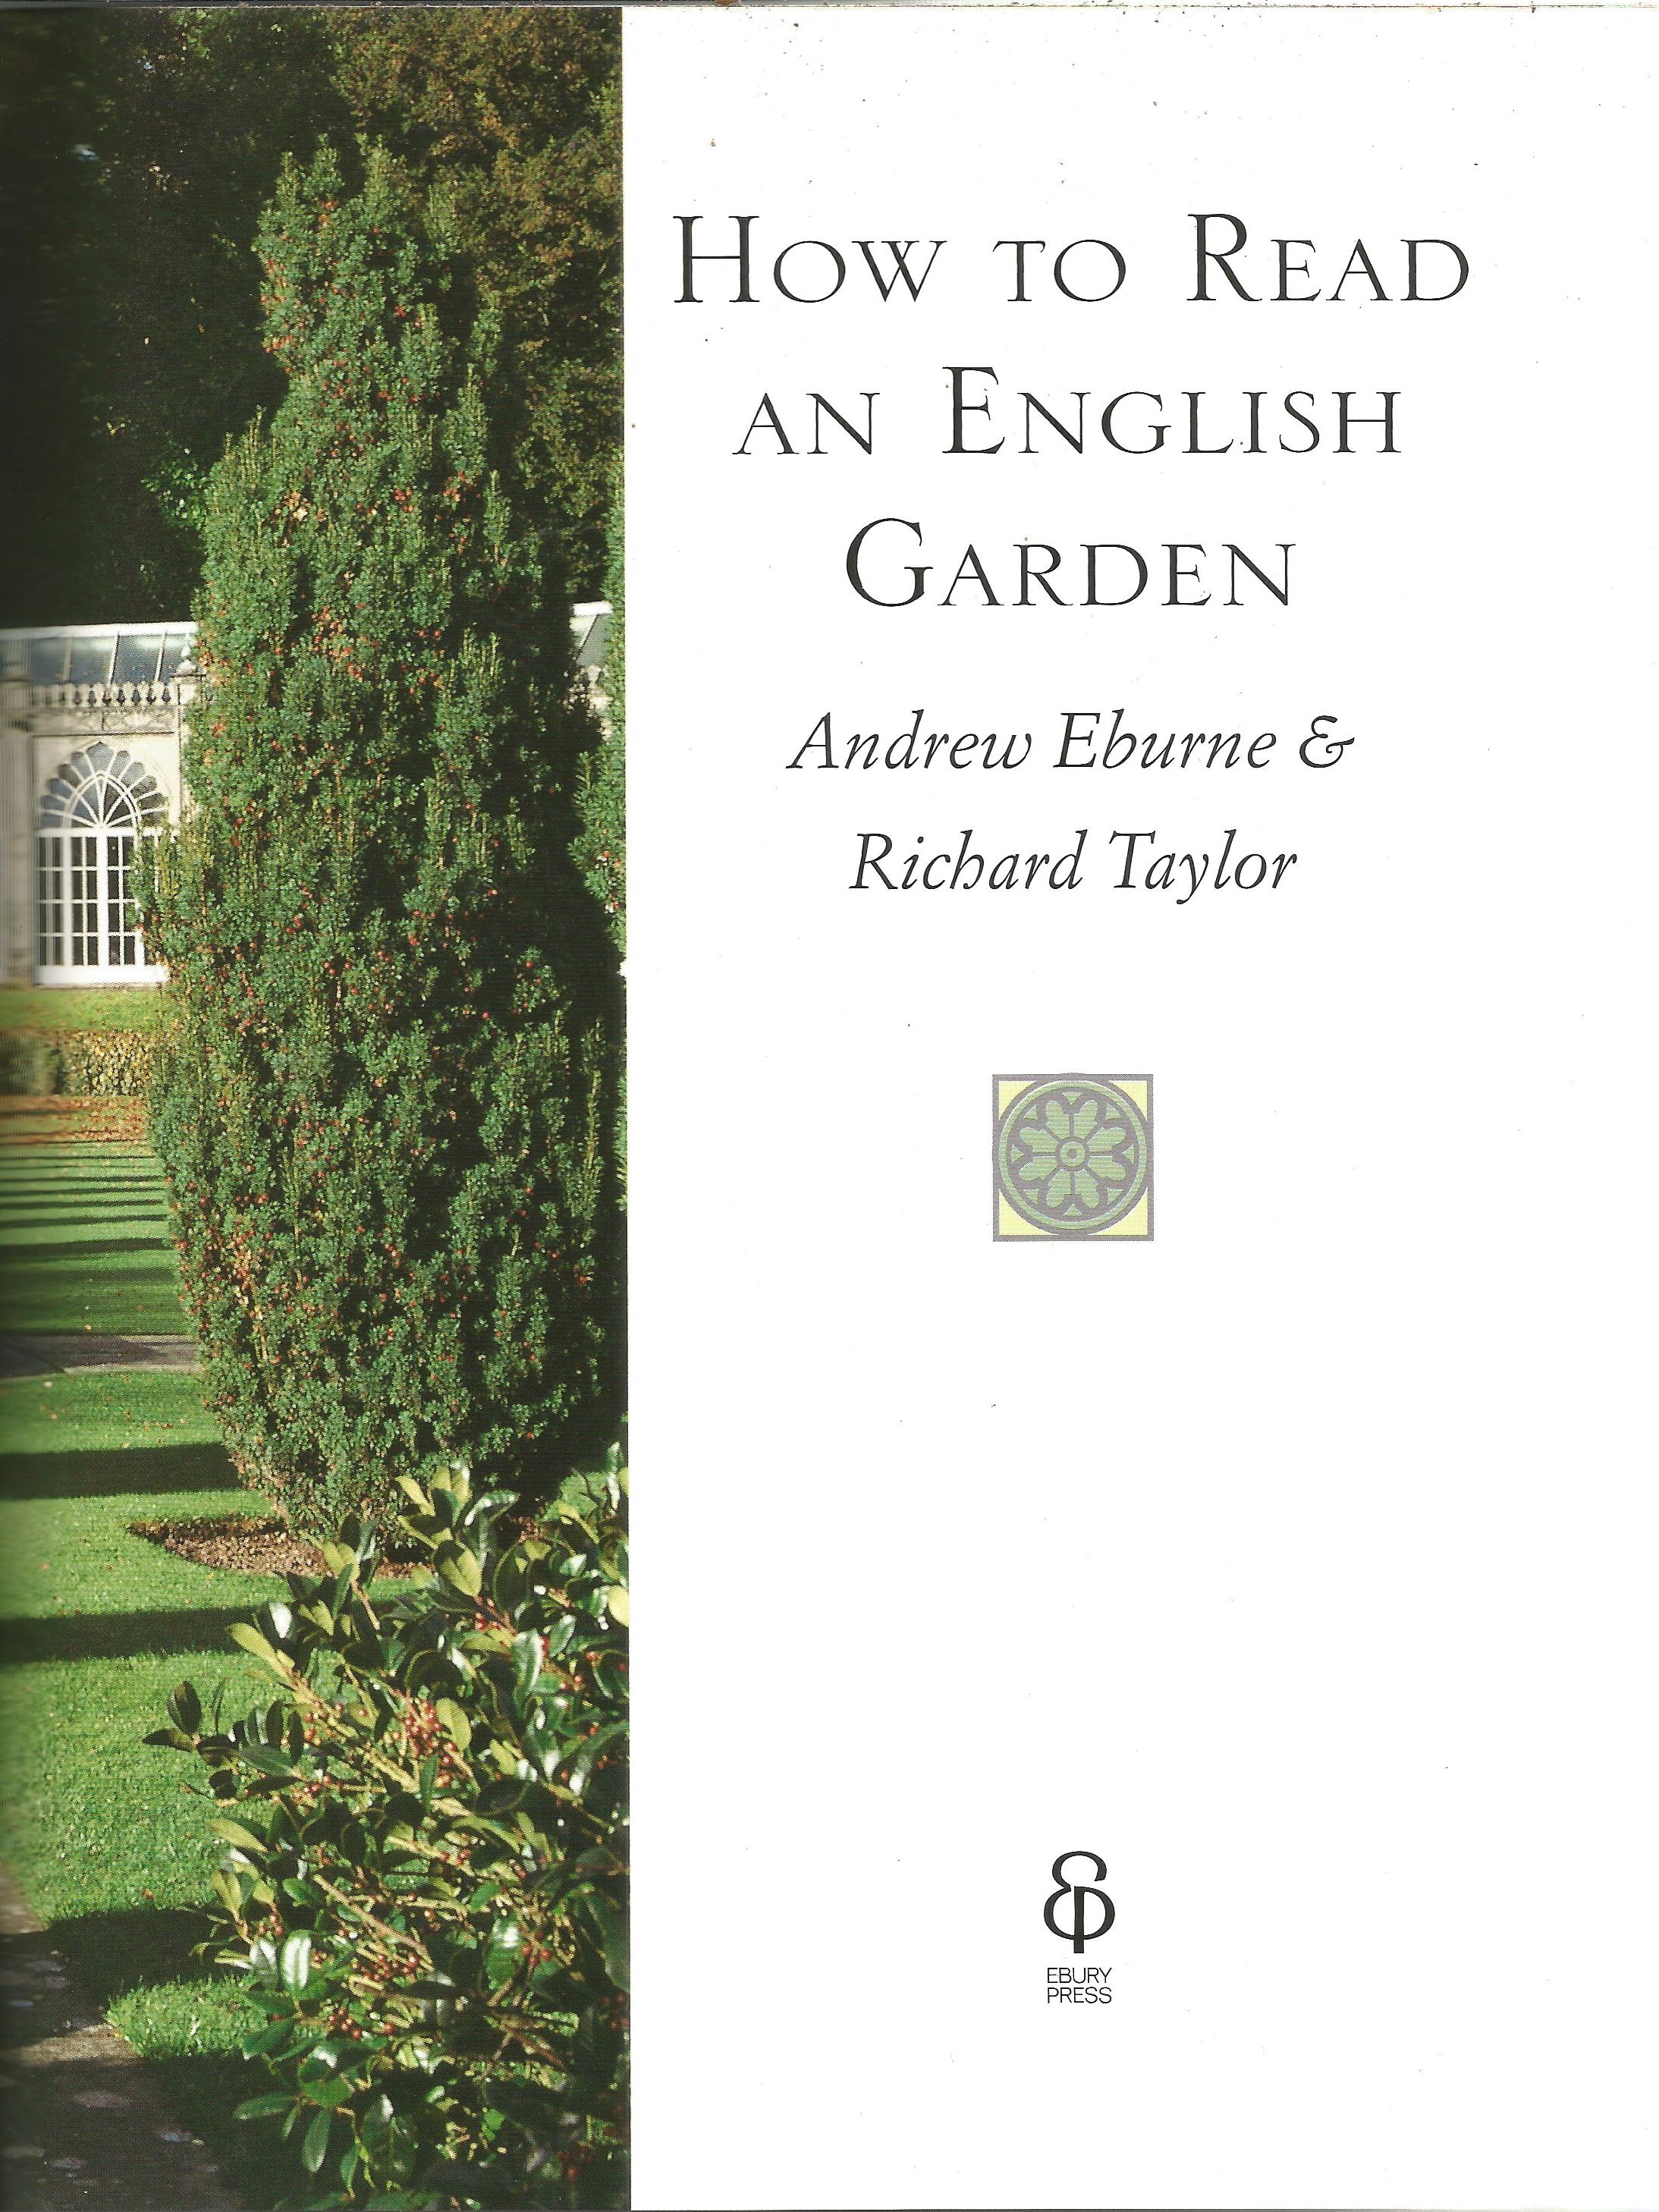 How to Read an English Garden by Andrew Eburne and Richard Taylor 2006 First Edition Hardback Book - Image 2 of 3